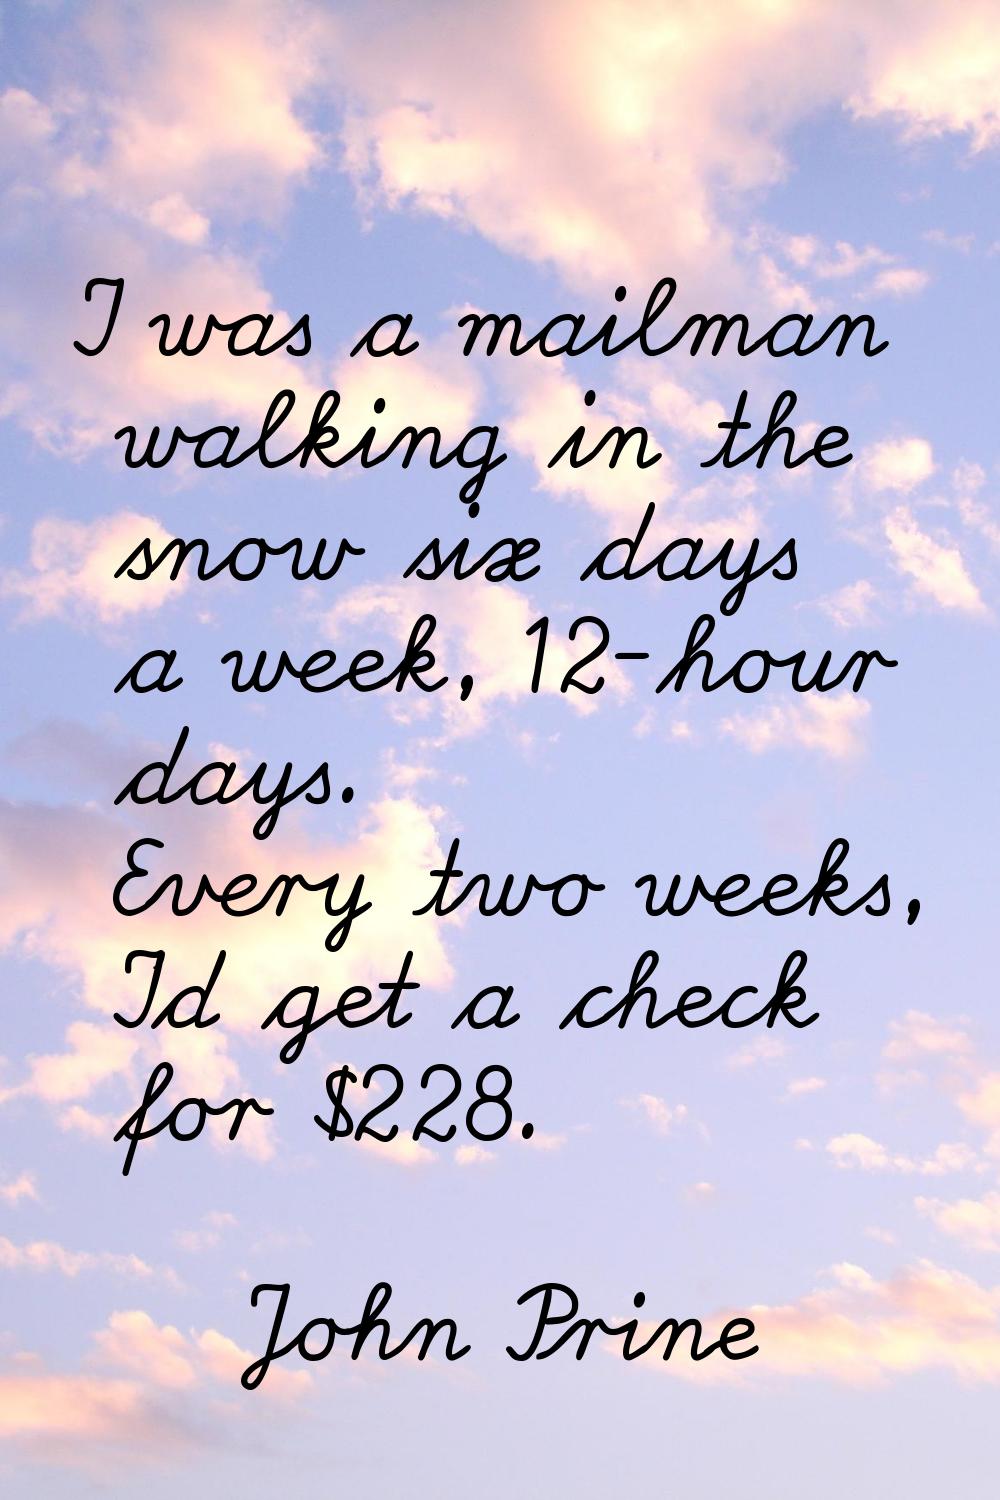 I was a mailman walking in the snow six days a week, 12-hour days. Every two weeks, I'd get a check